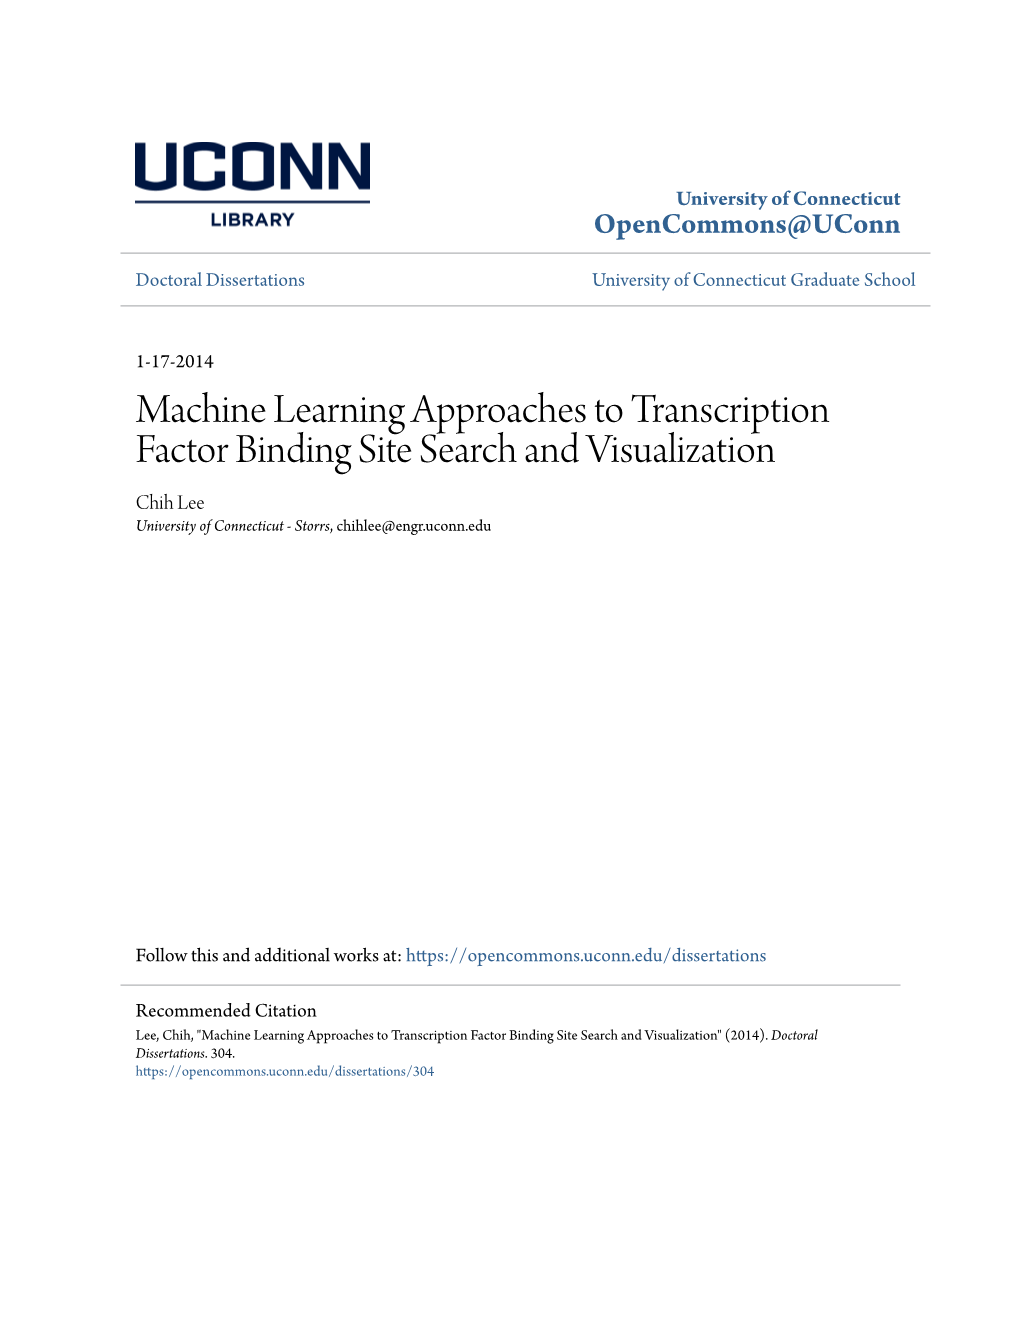 Machine Learning Approaches to Transcription Factor Binding Site Search and Visualization Chih Lee University of Connecticut - Storrs, Chihlee@Engr.Uconn.Edu